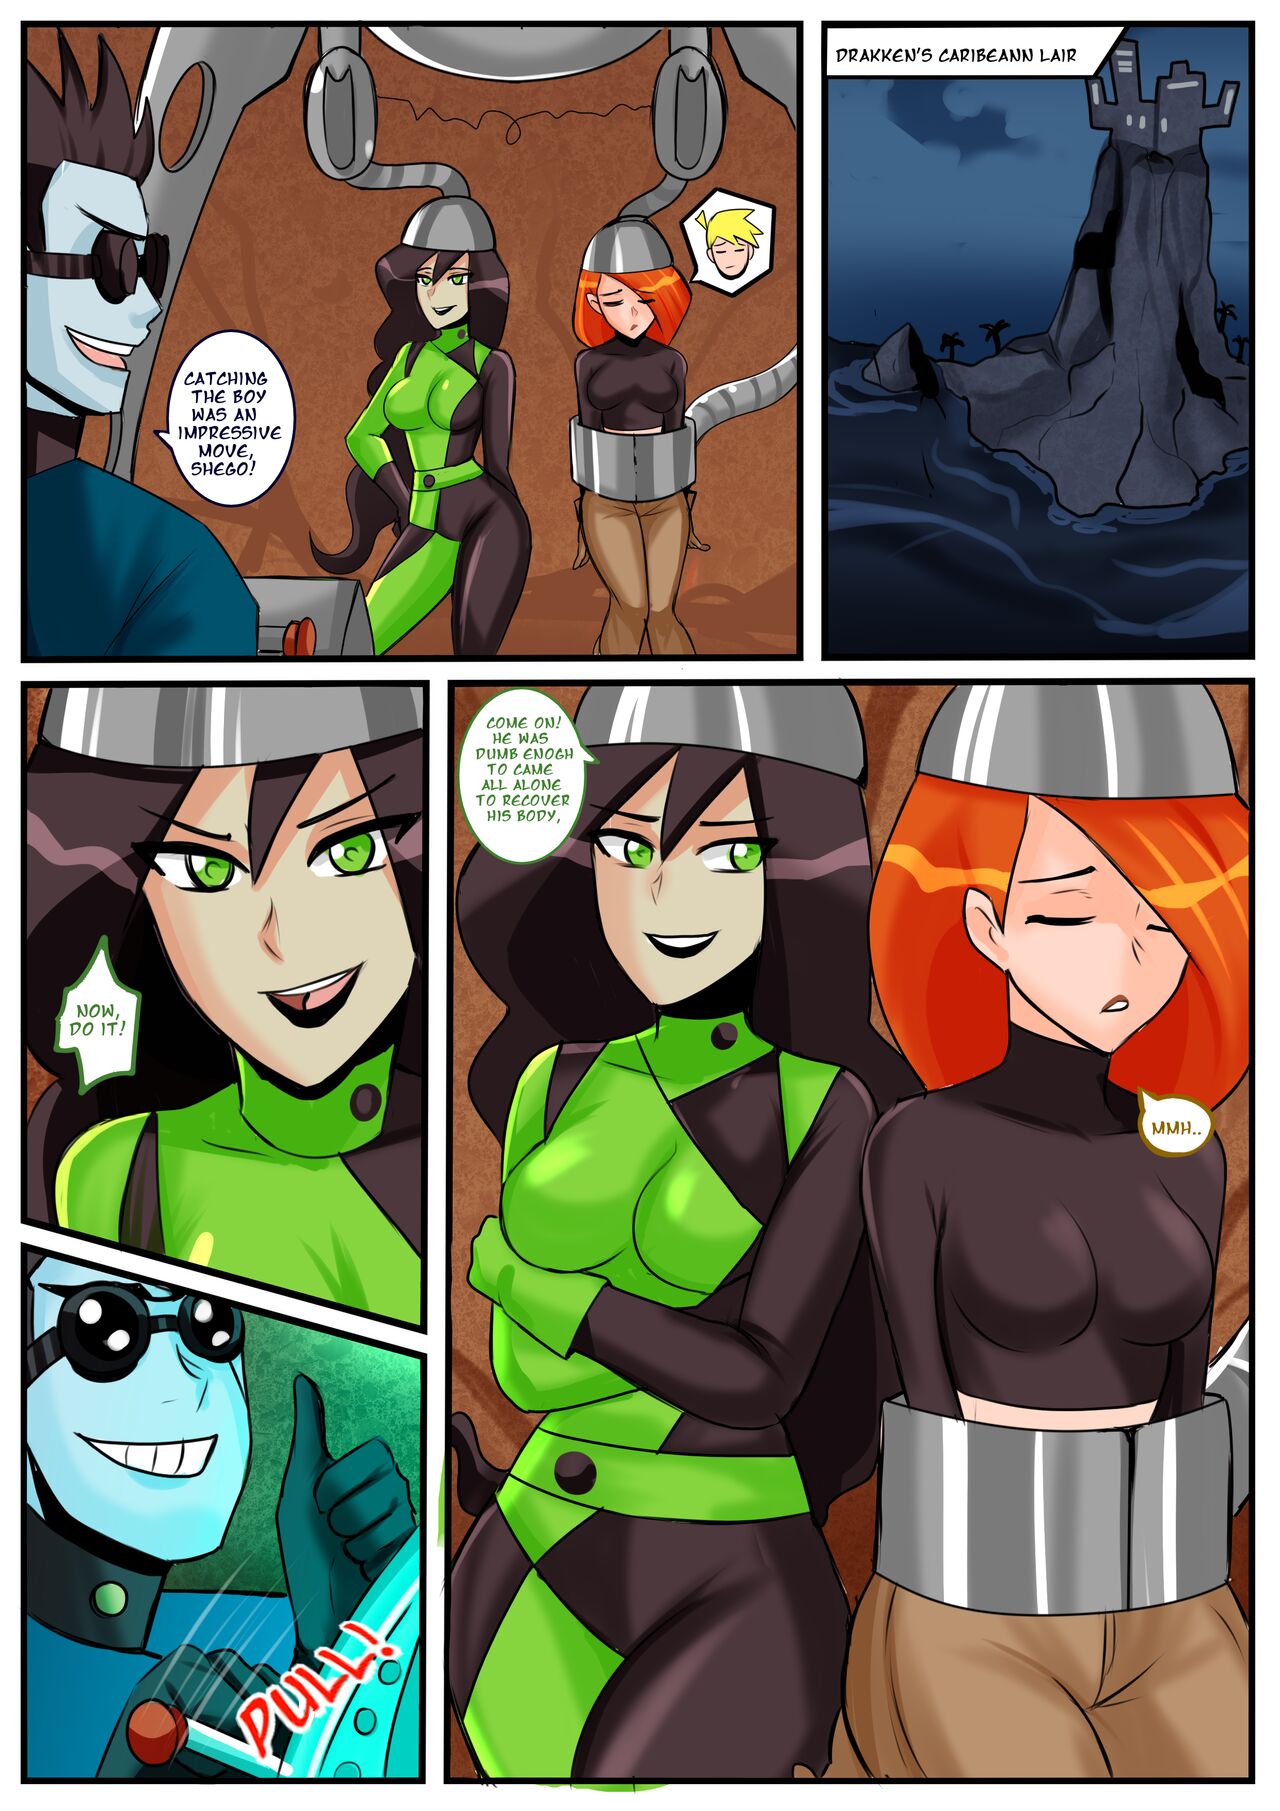 Kim Possible Breast Inflation - Anything's Possible (Kim Possible) [TSFSingularity] - Porn Cartoon Comics